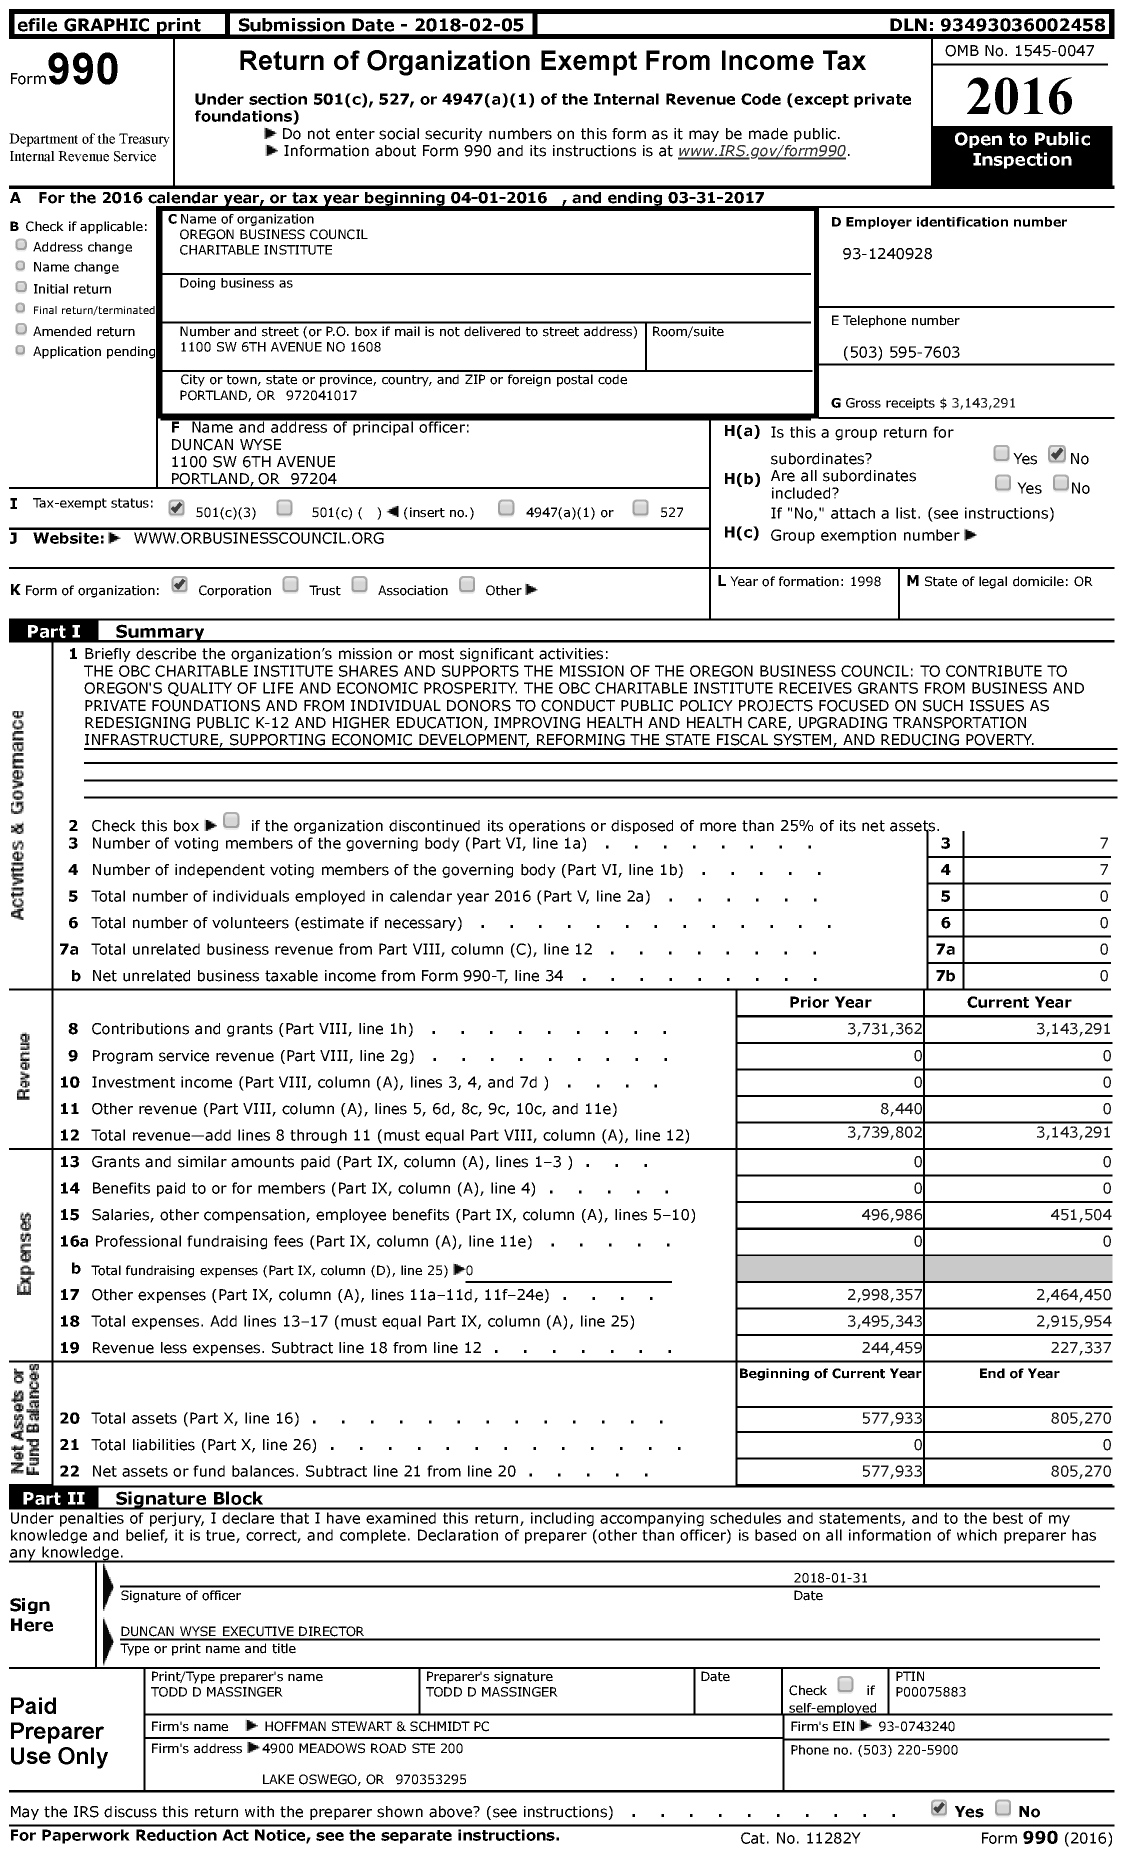 Image of first page of 2016 Form 990 for Oregon Business Council Charitable Institute